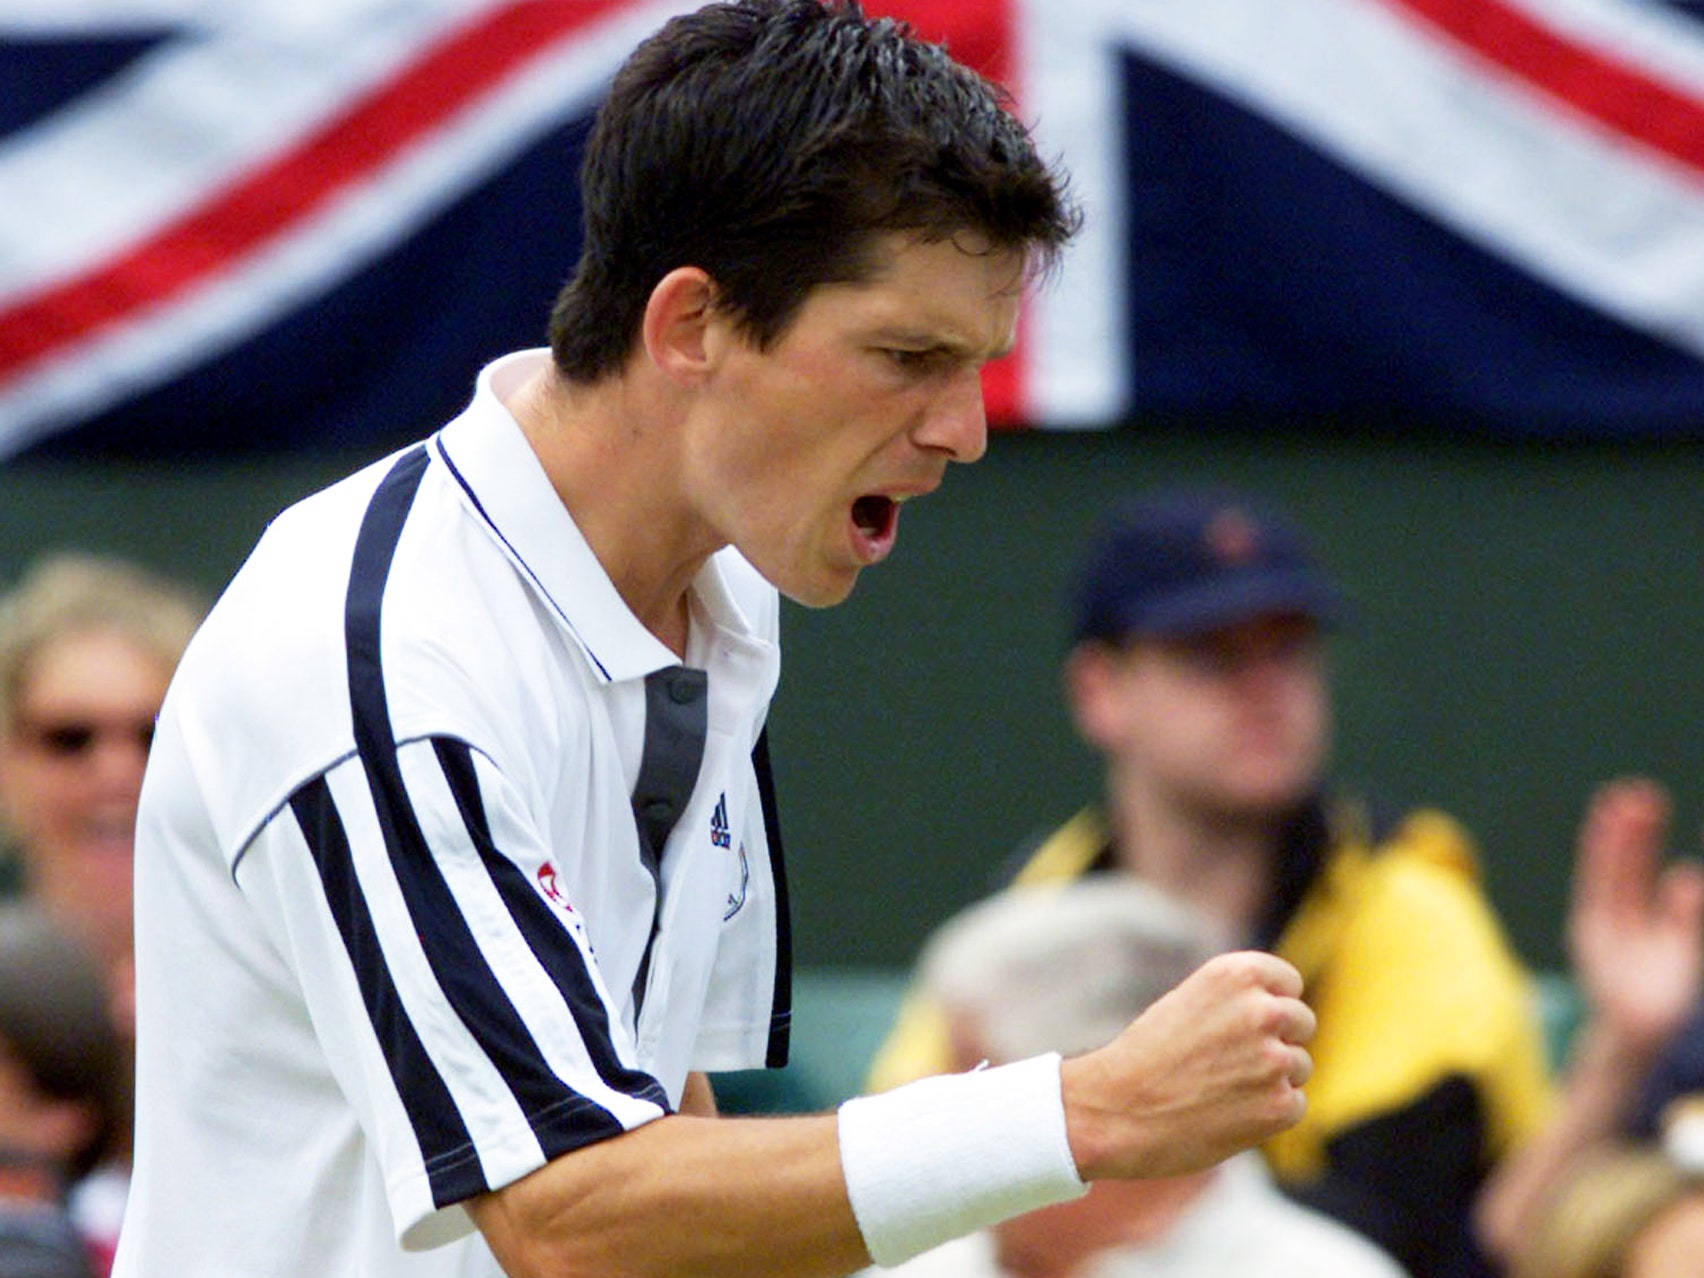 British Tennis Icon Tim Henman Celebrating Victory with Clenched Fist. Wallpaper